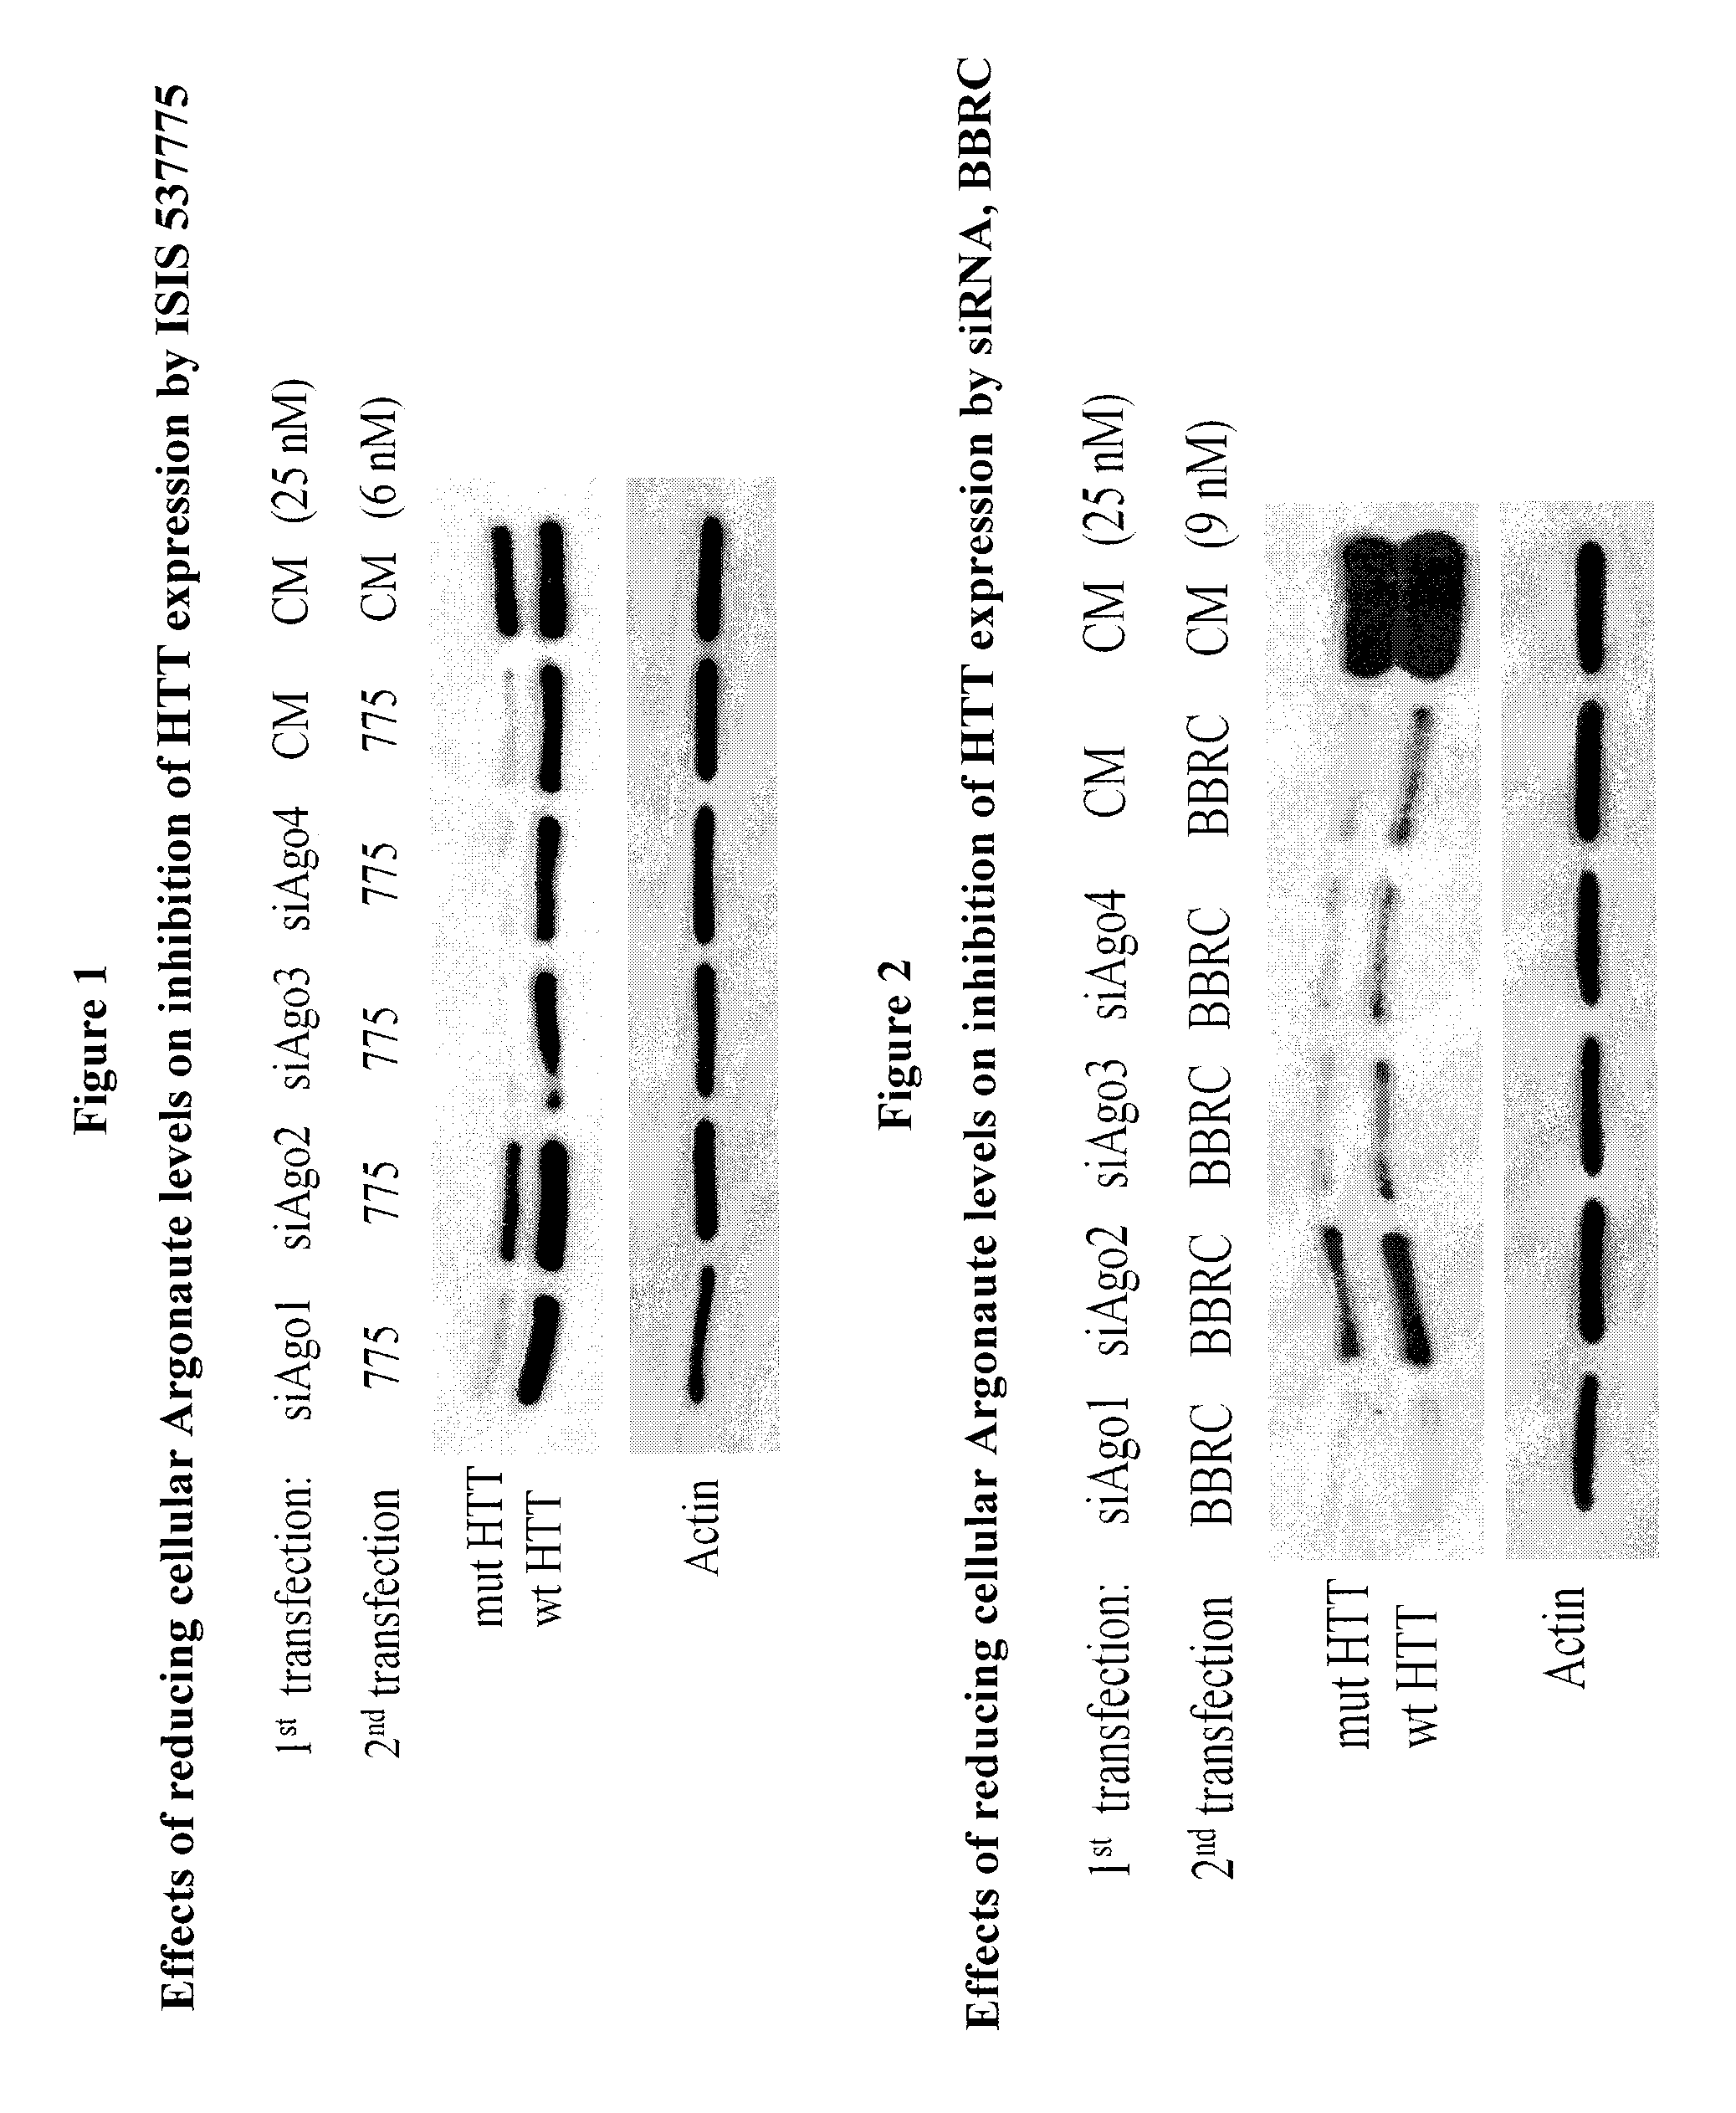 Methods and compounds useful in conditions related to repeat expansion